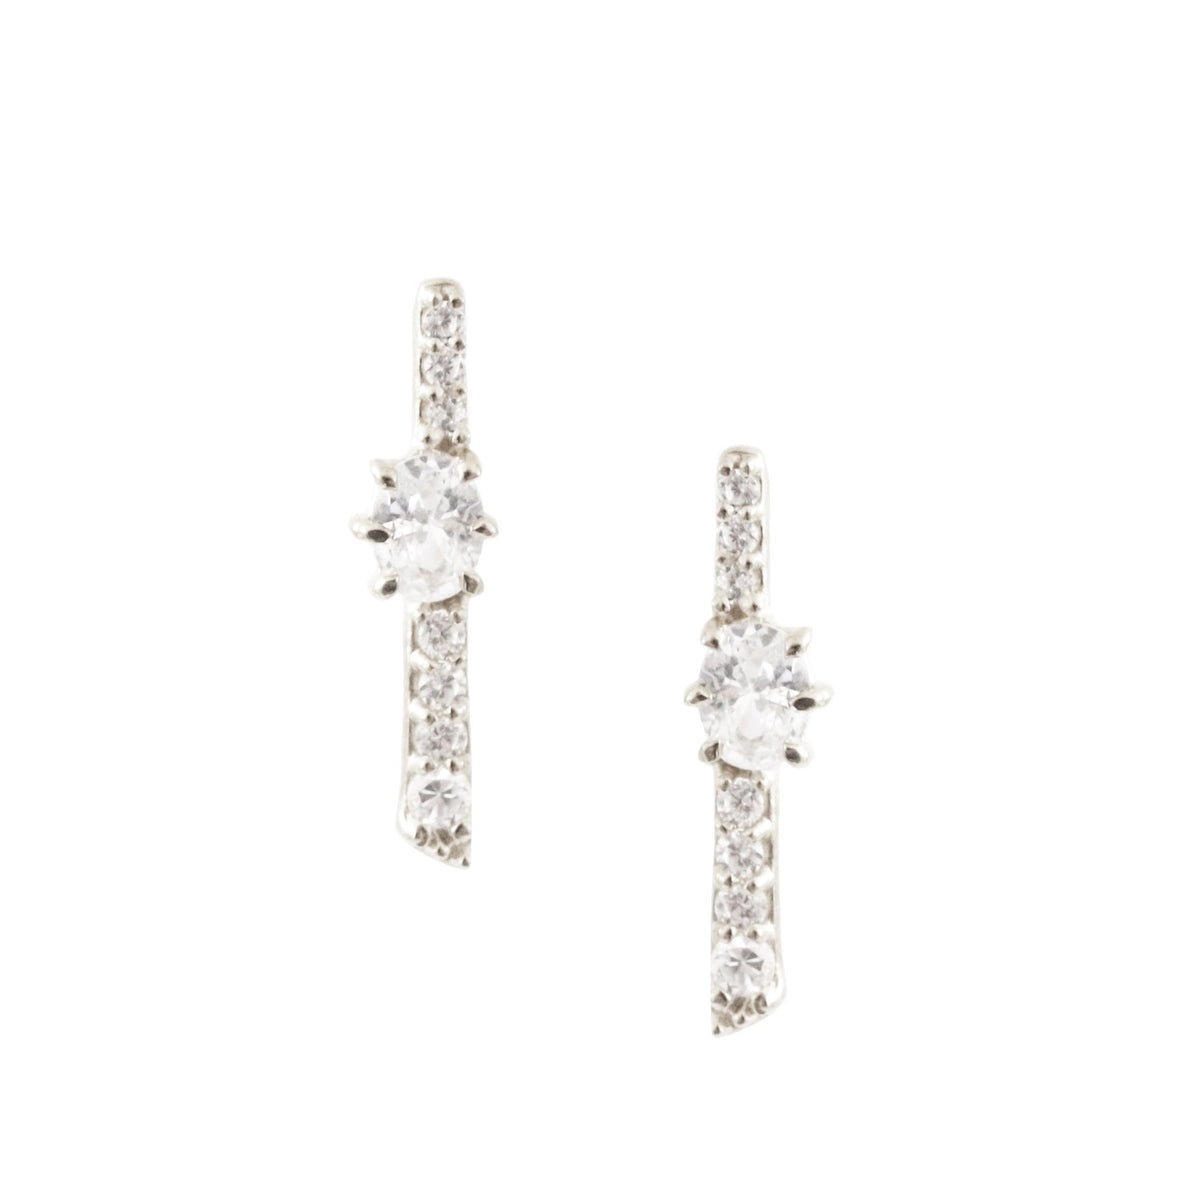 DAINTY KIND OVAL BAR STUDS - CUBIC ZIRCONIA &amp; SILVER - SO PRETTY CARA COTTER